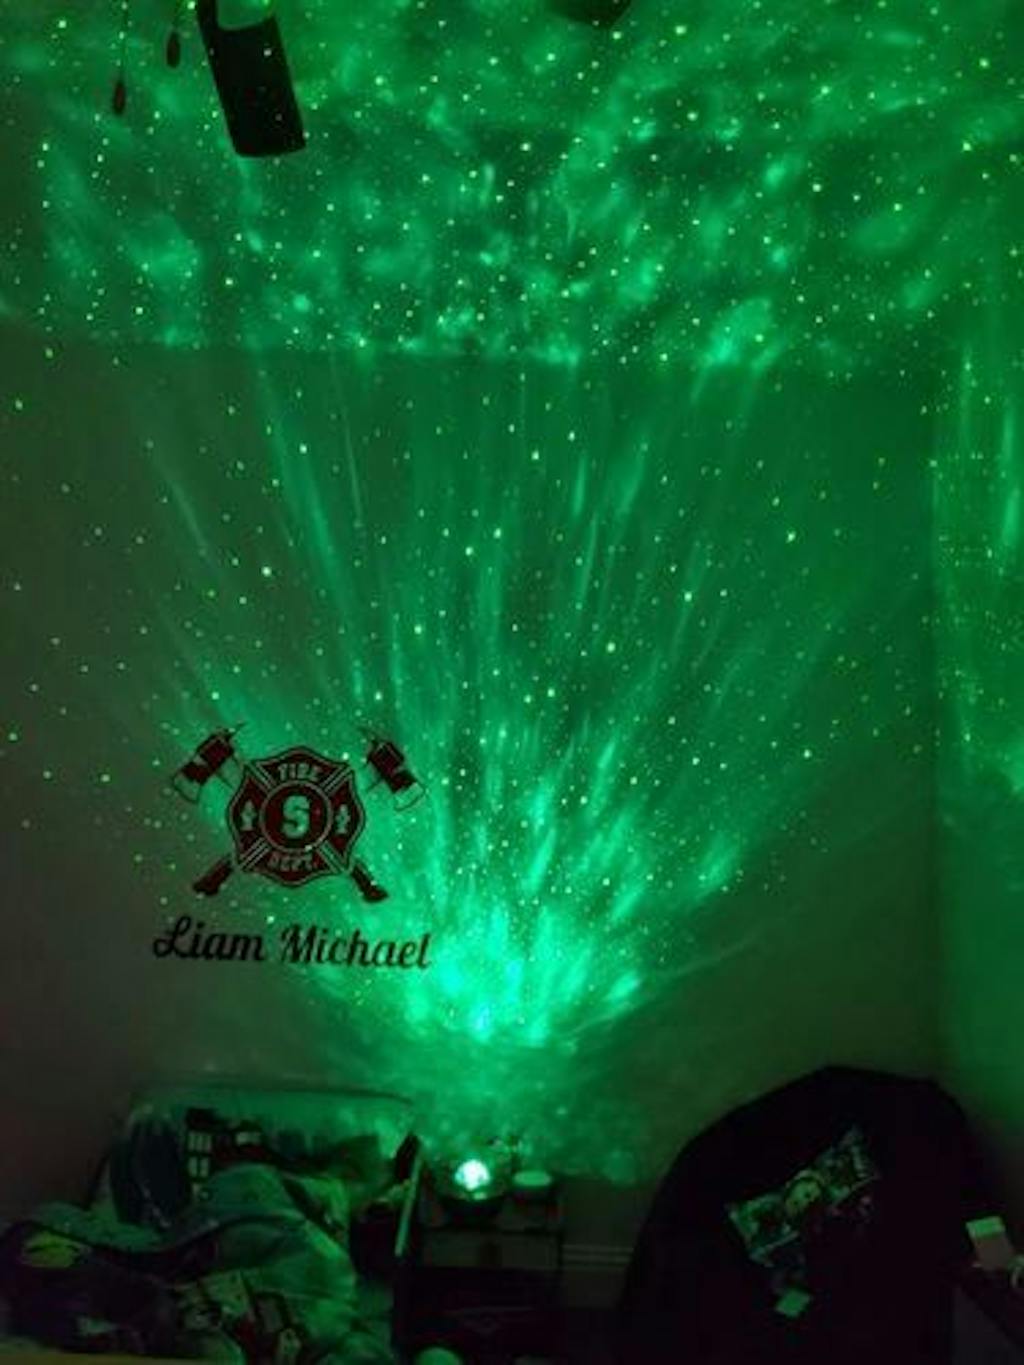 LED Galaxy Projector – Juicleds